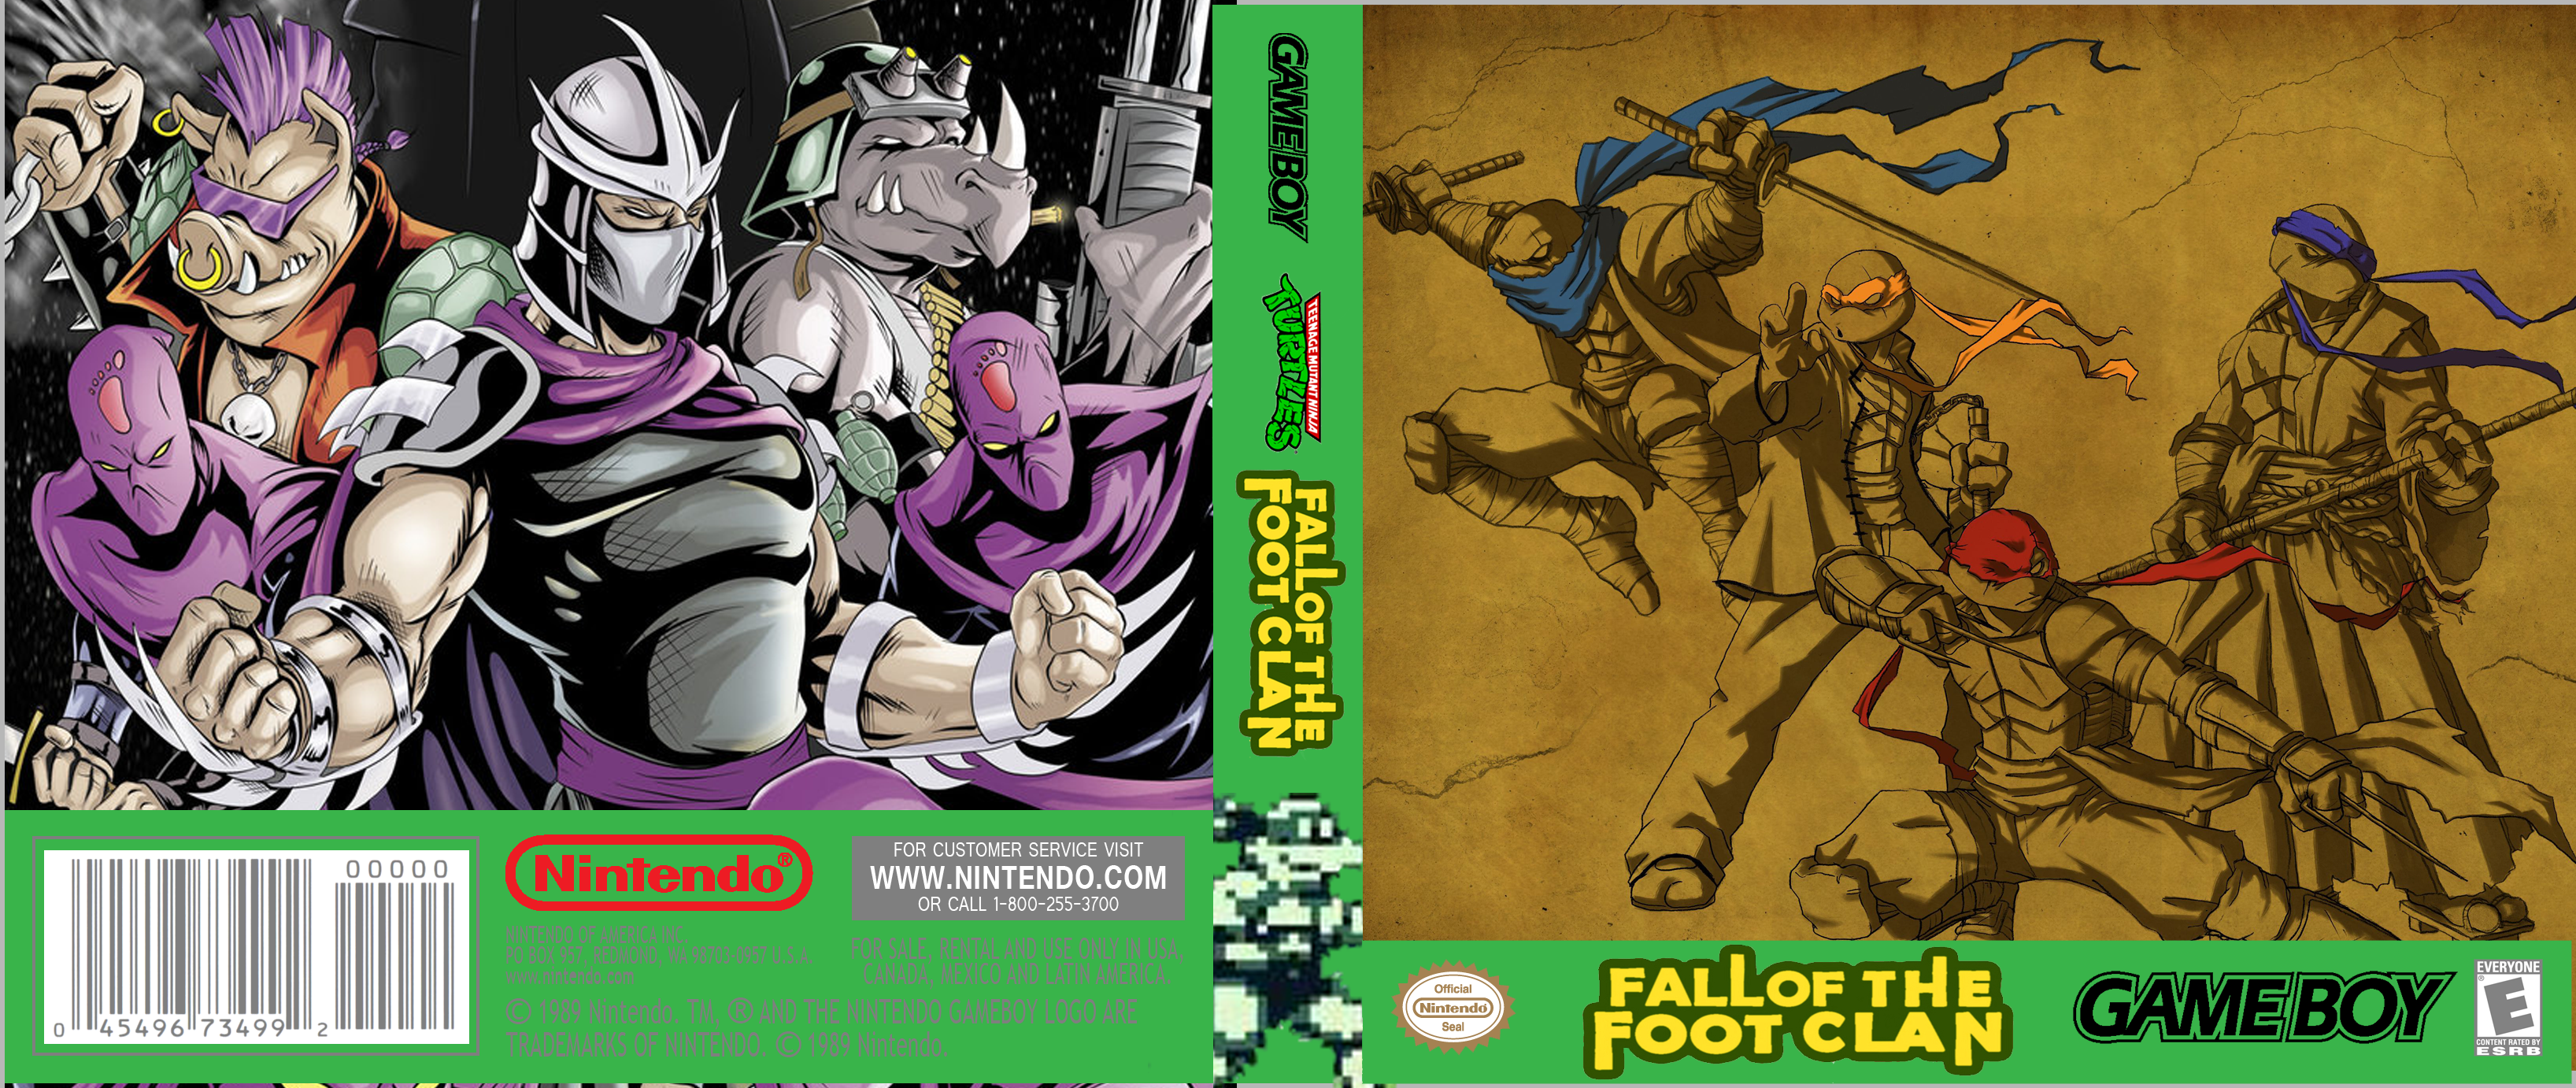 TMNT Fall of the Foot Clan box cover